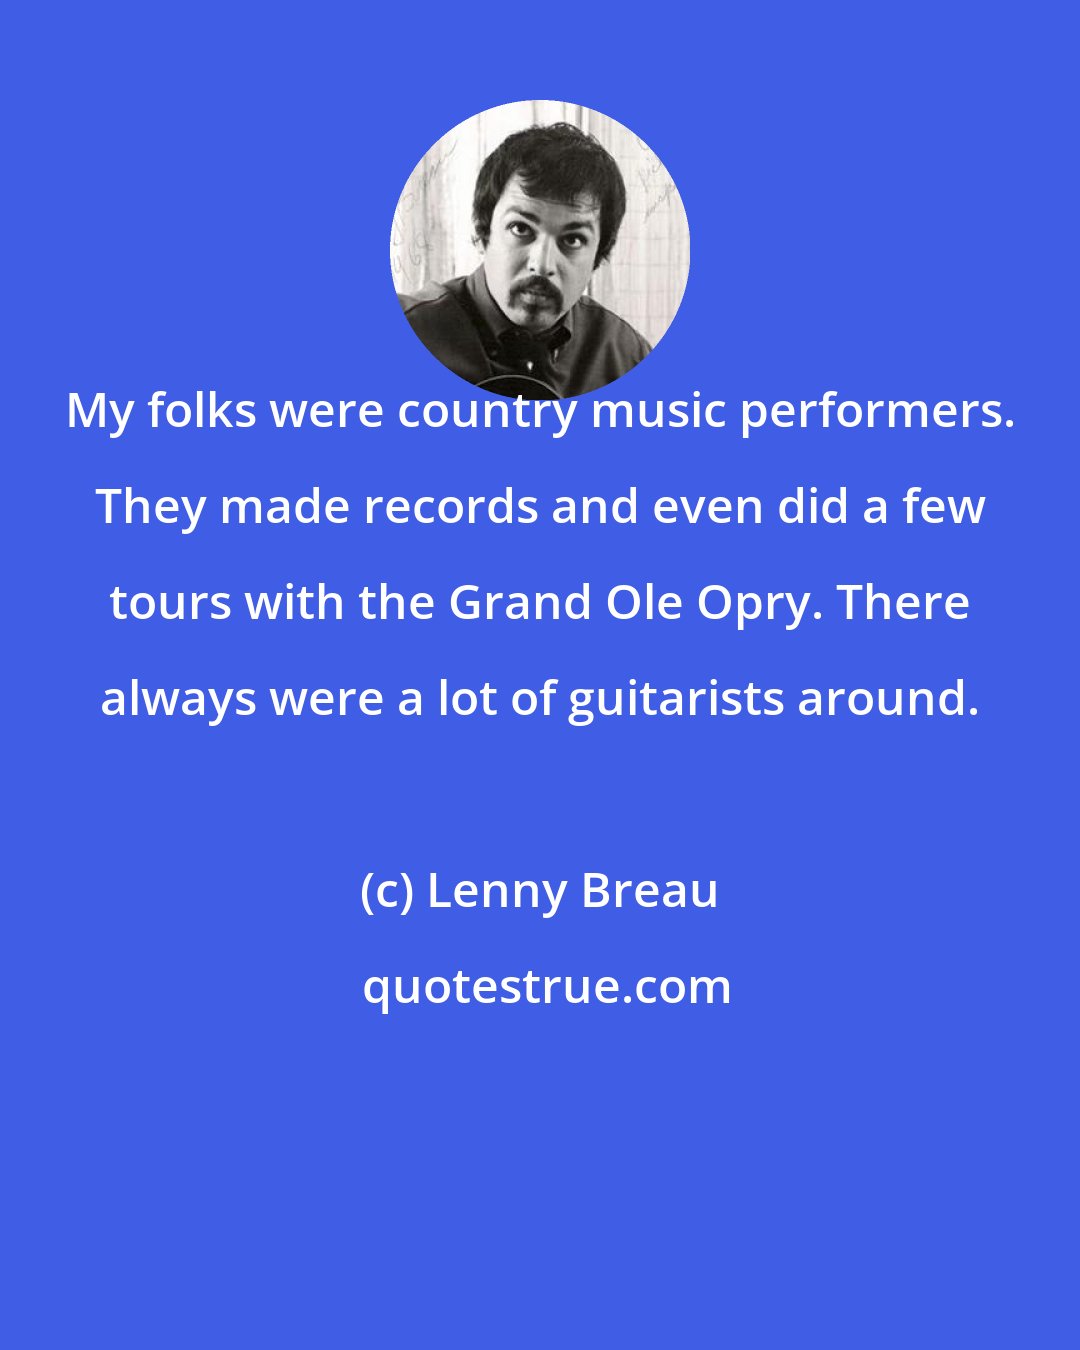 Lenny Breau: My folks were country music performers. They made records and even did a few tours with the Grand Ole Opry. There always were a lot of guitarists around.